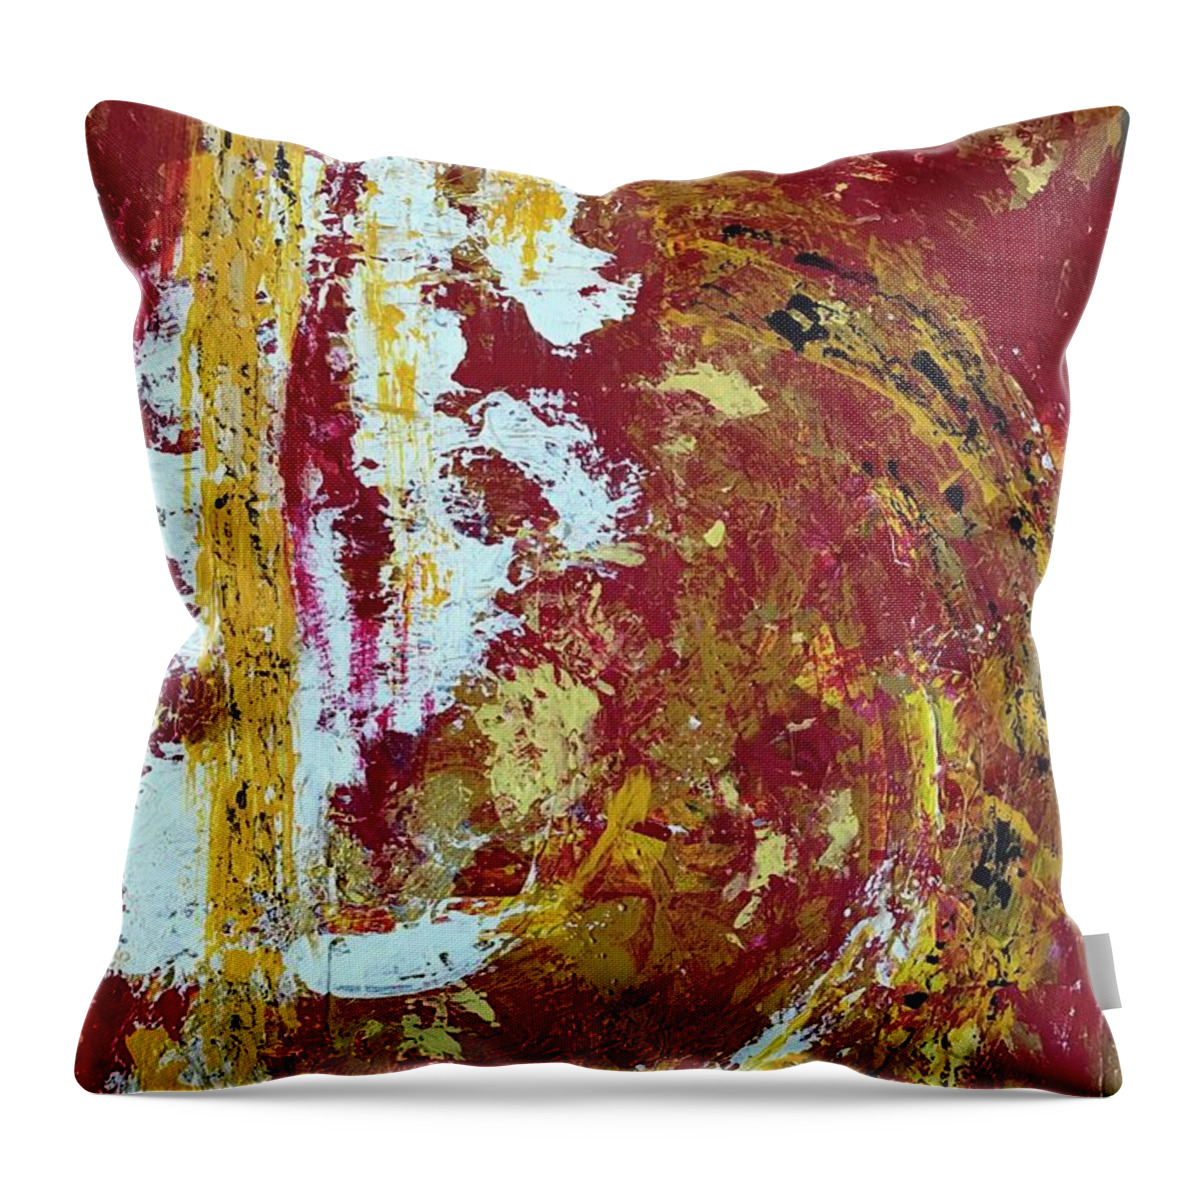 Red Throw Pillow featuring the painting Opening by Medge Jaspan